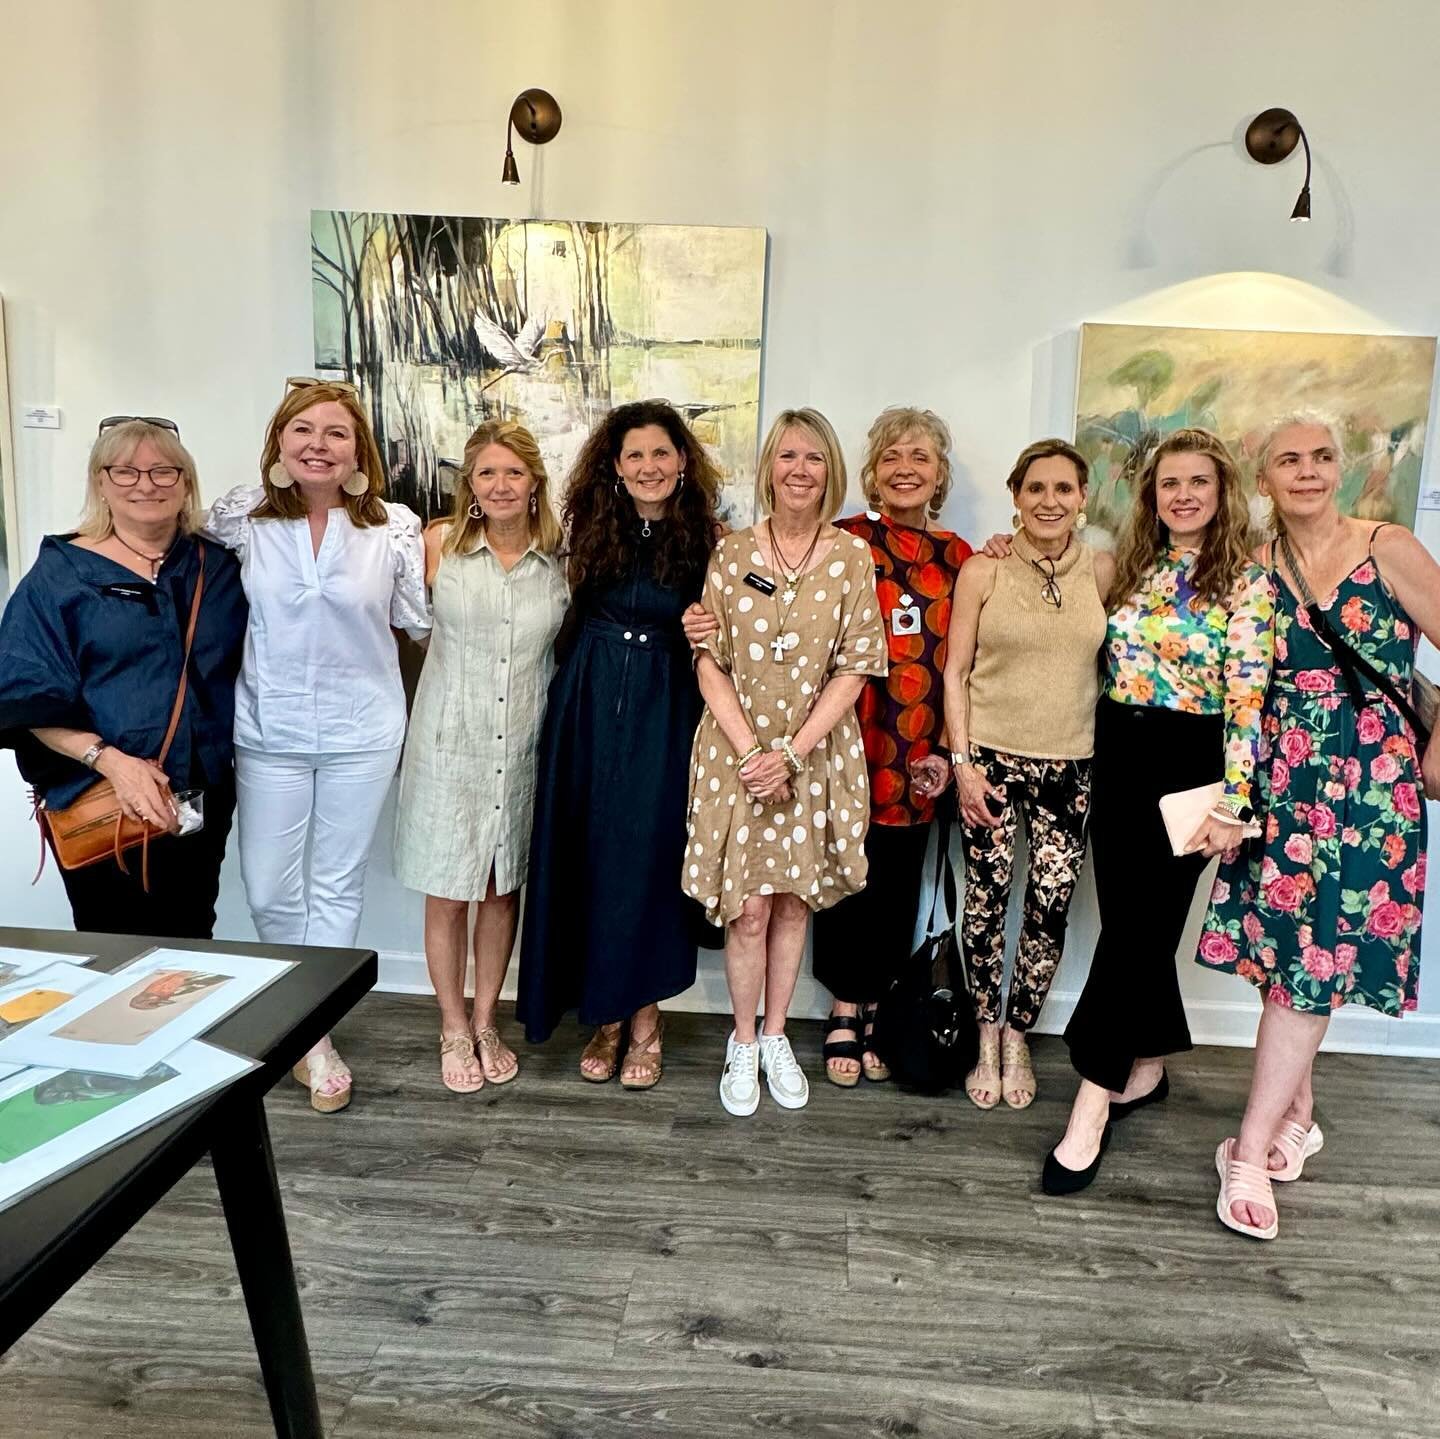 What a fabulous grand opening night celebrating with family, friends, and new friends! Life at The Loft feels good! Many thanks to our gallery director Ashleigh Lorenz for hanging our beautiful new show! HORIZON will hang through June 30th. Please ma